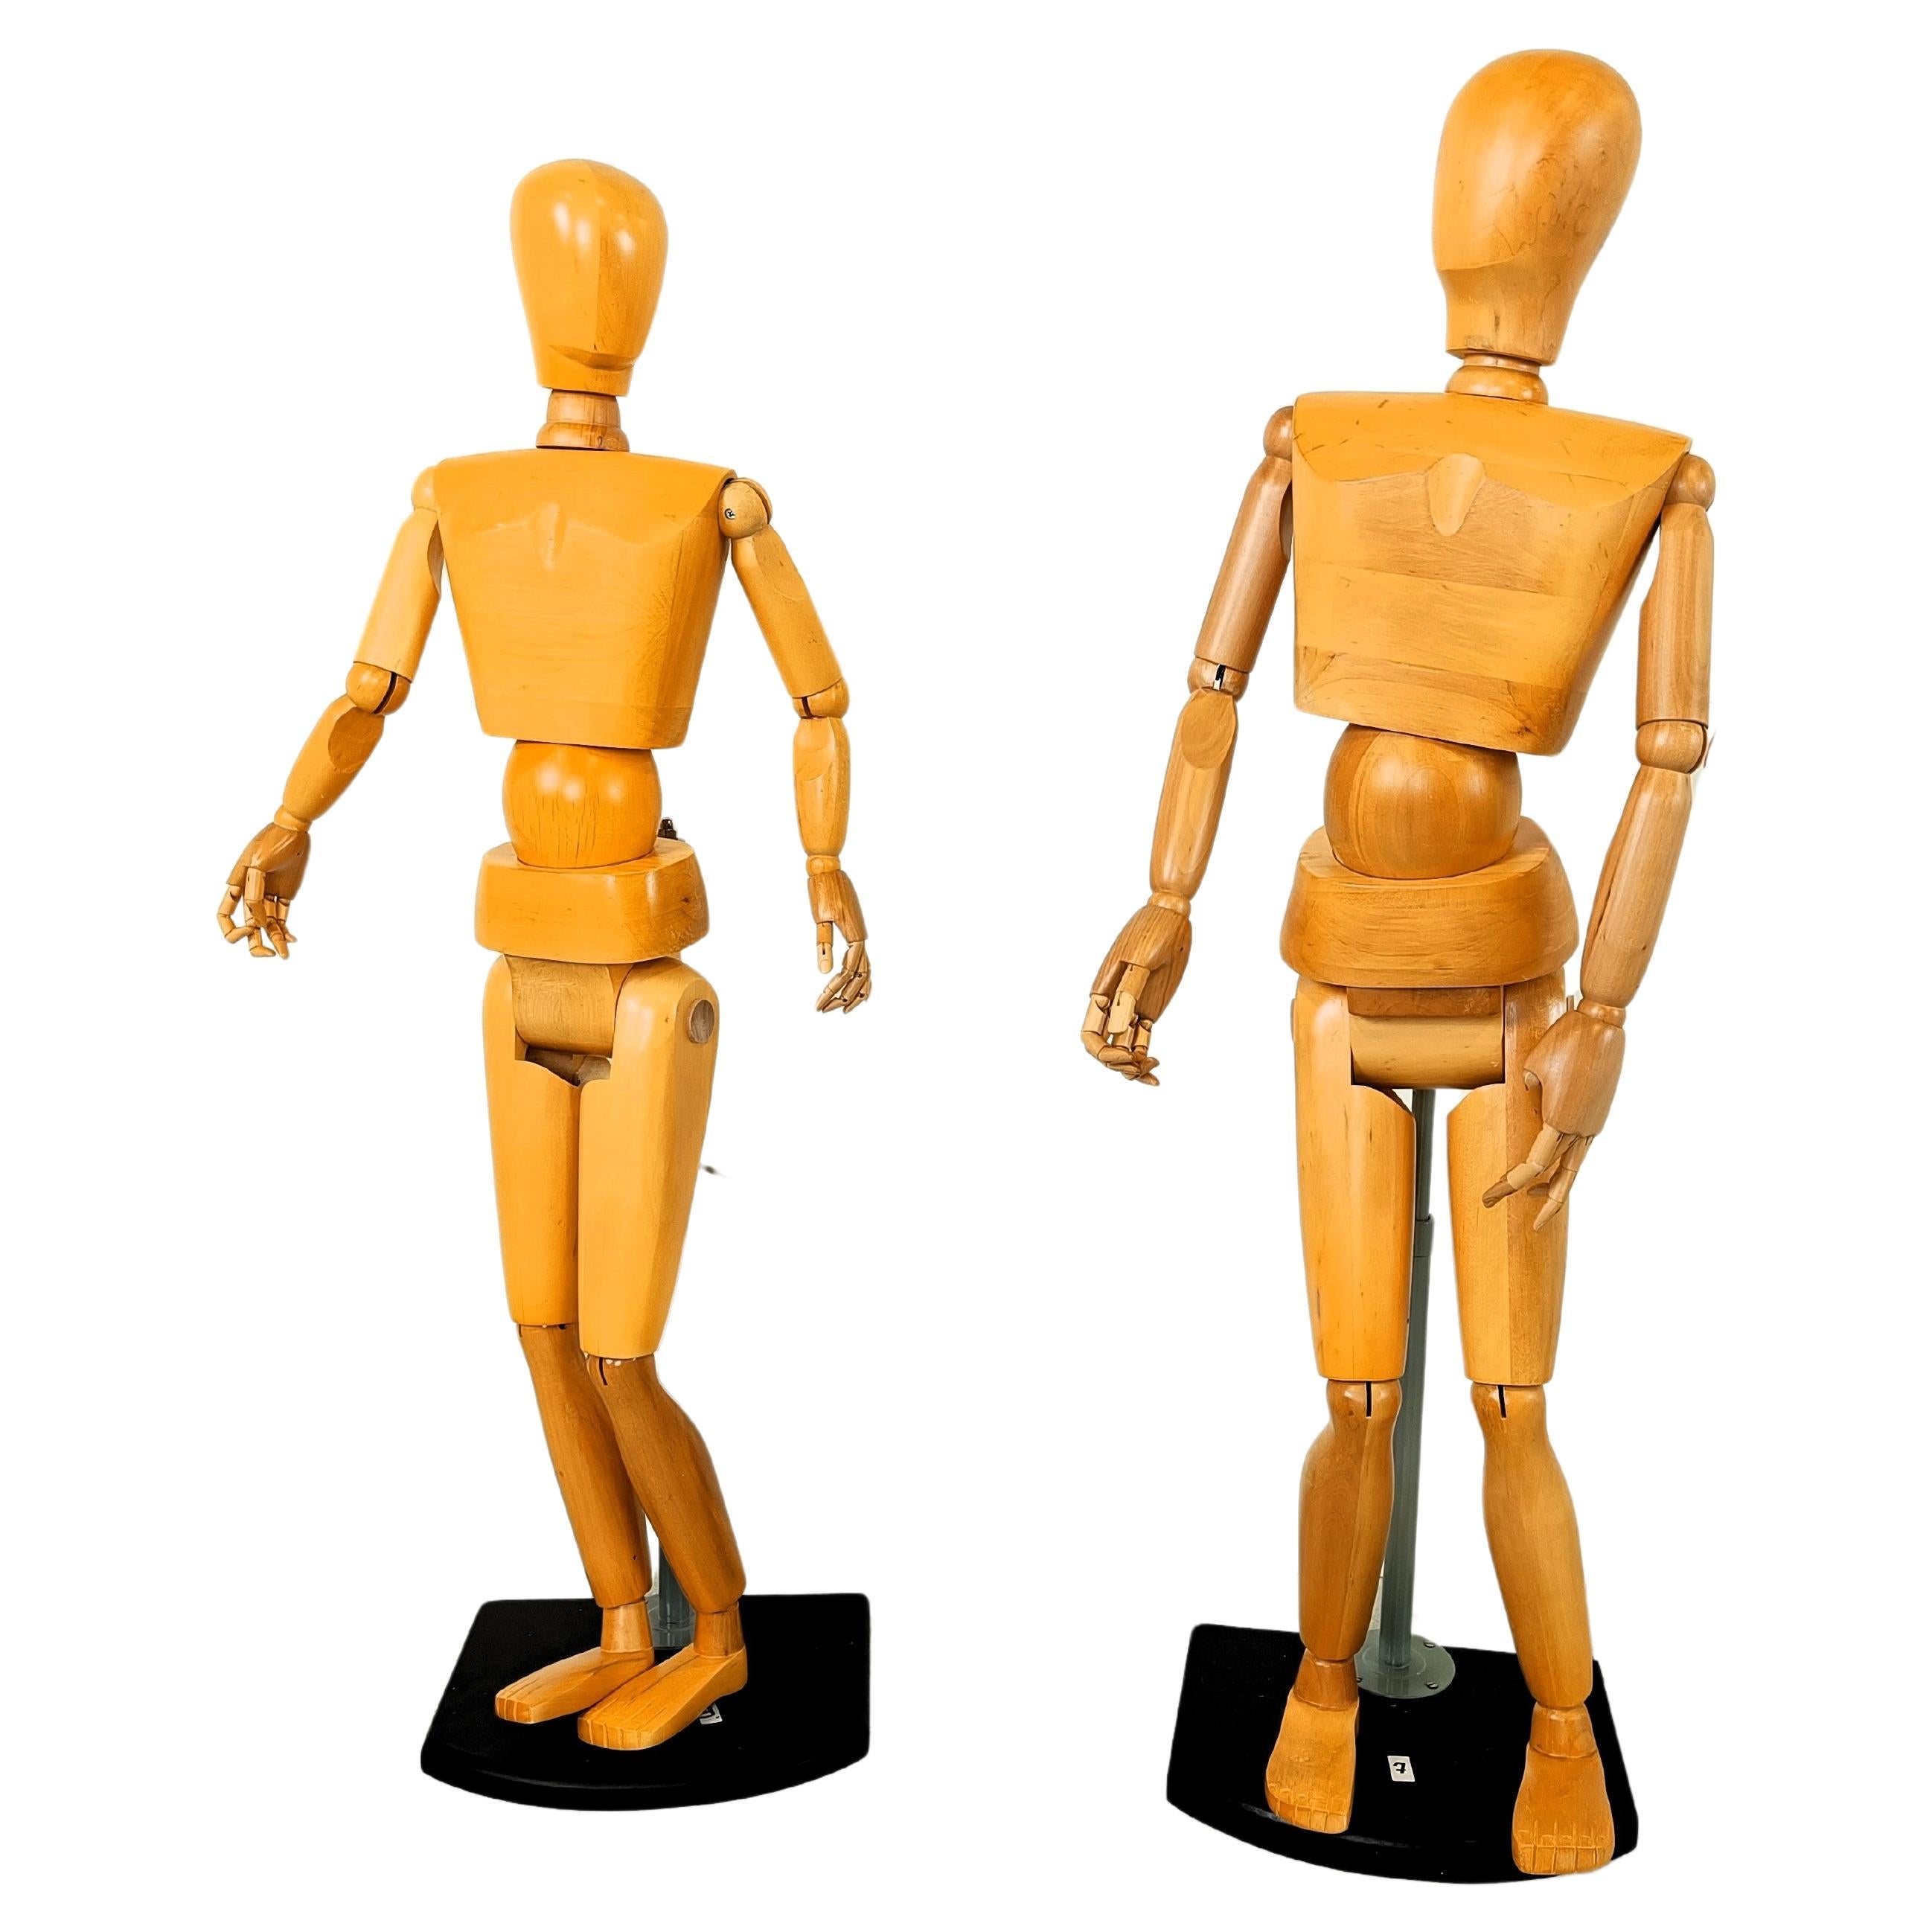 Life size artistic lay figures set of 2, 1980s